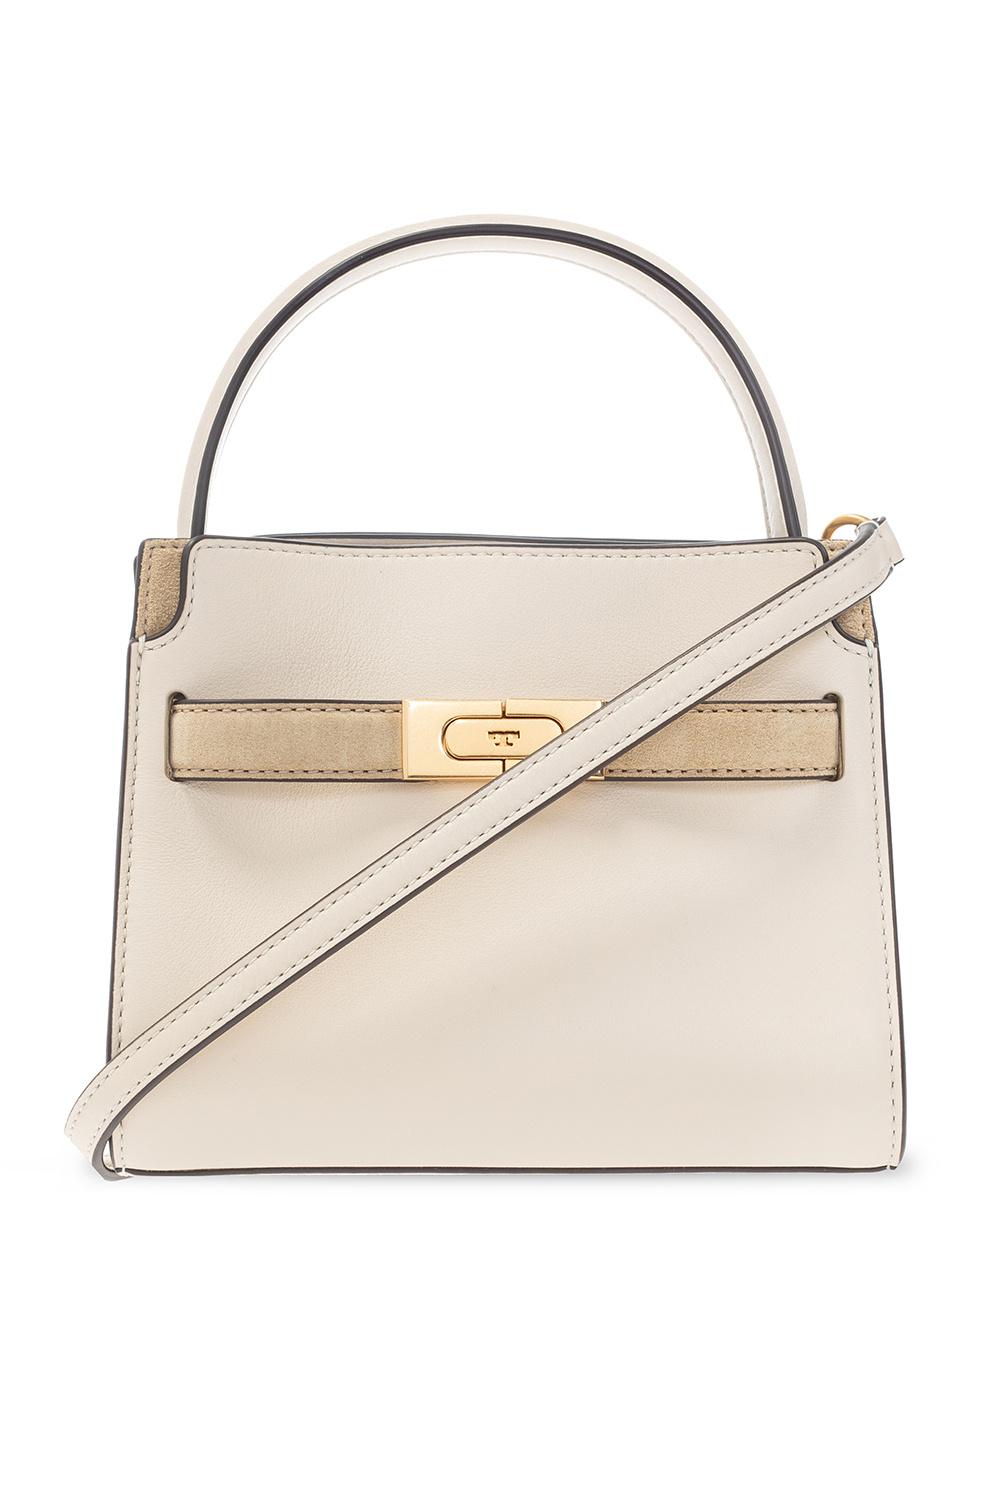 Tory Burch Lee Radziwill Petite Double Bag in Natural | Lyst Australia